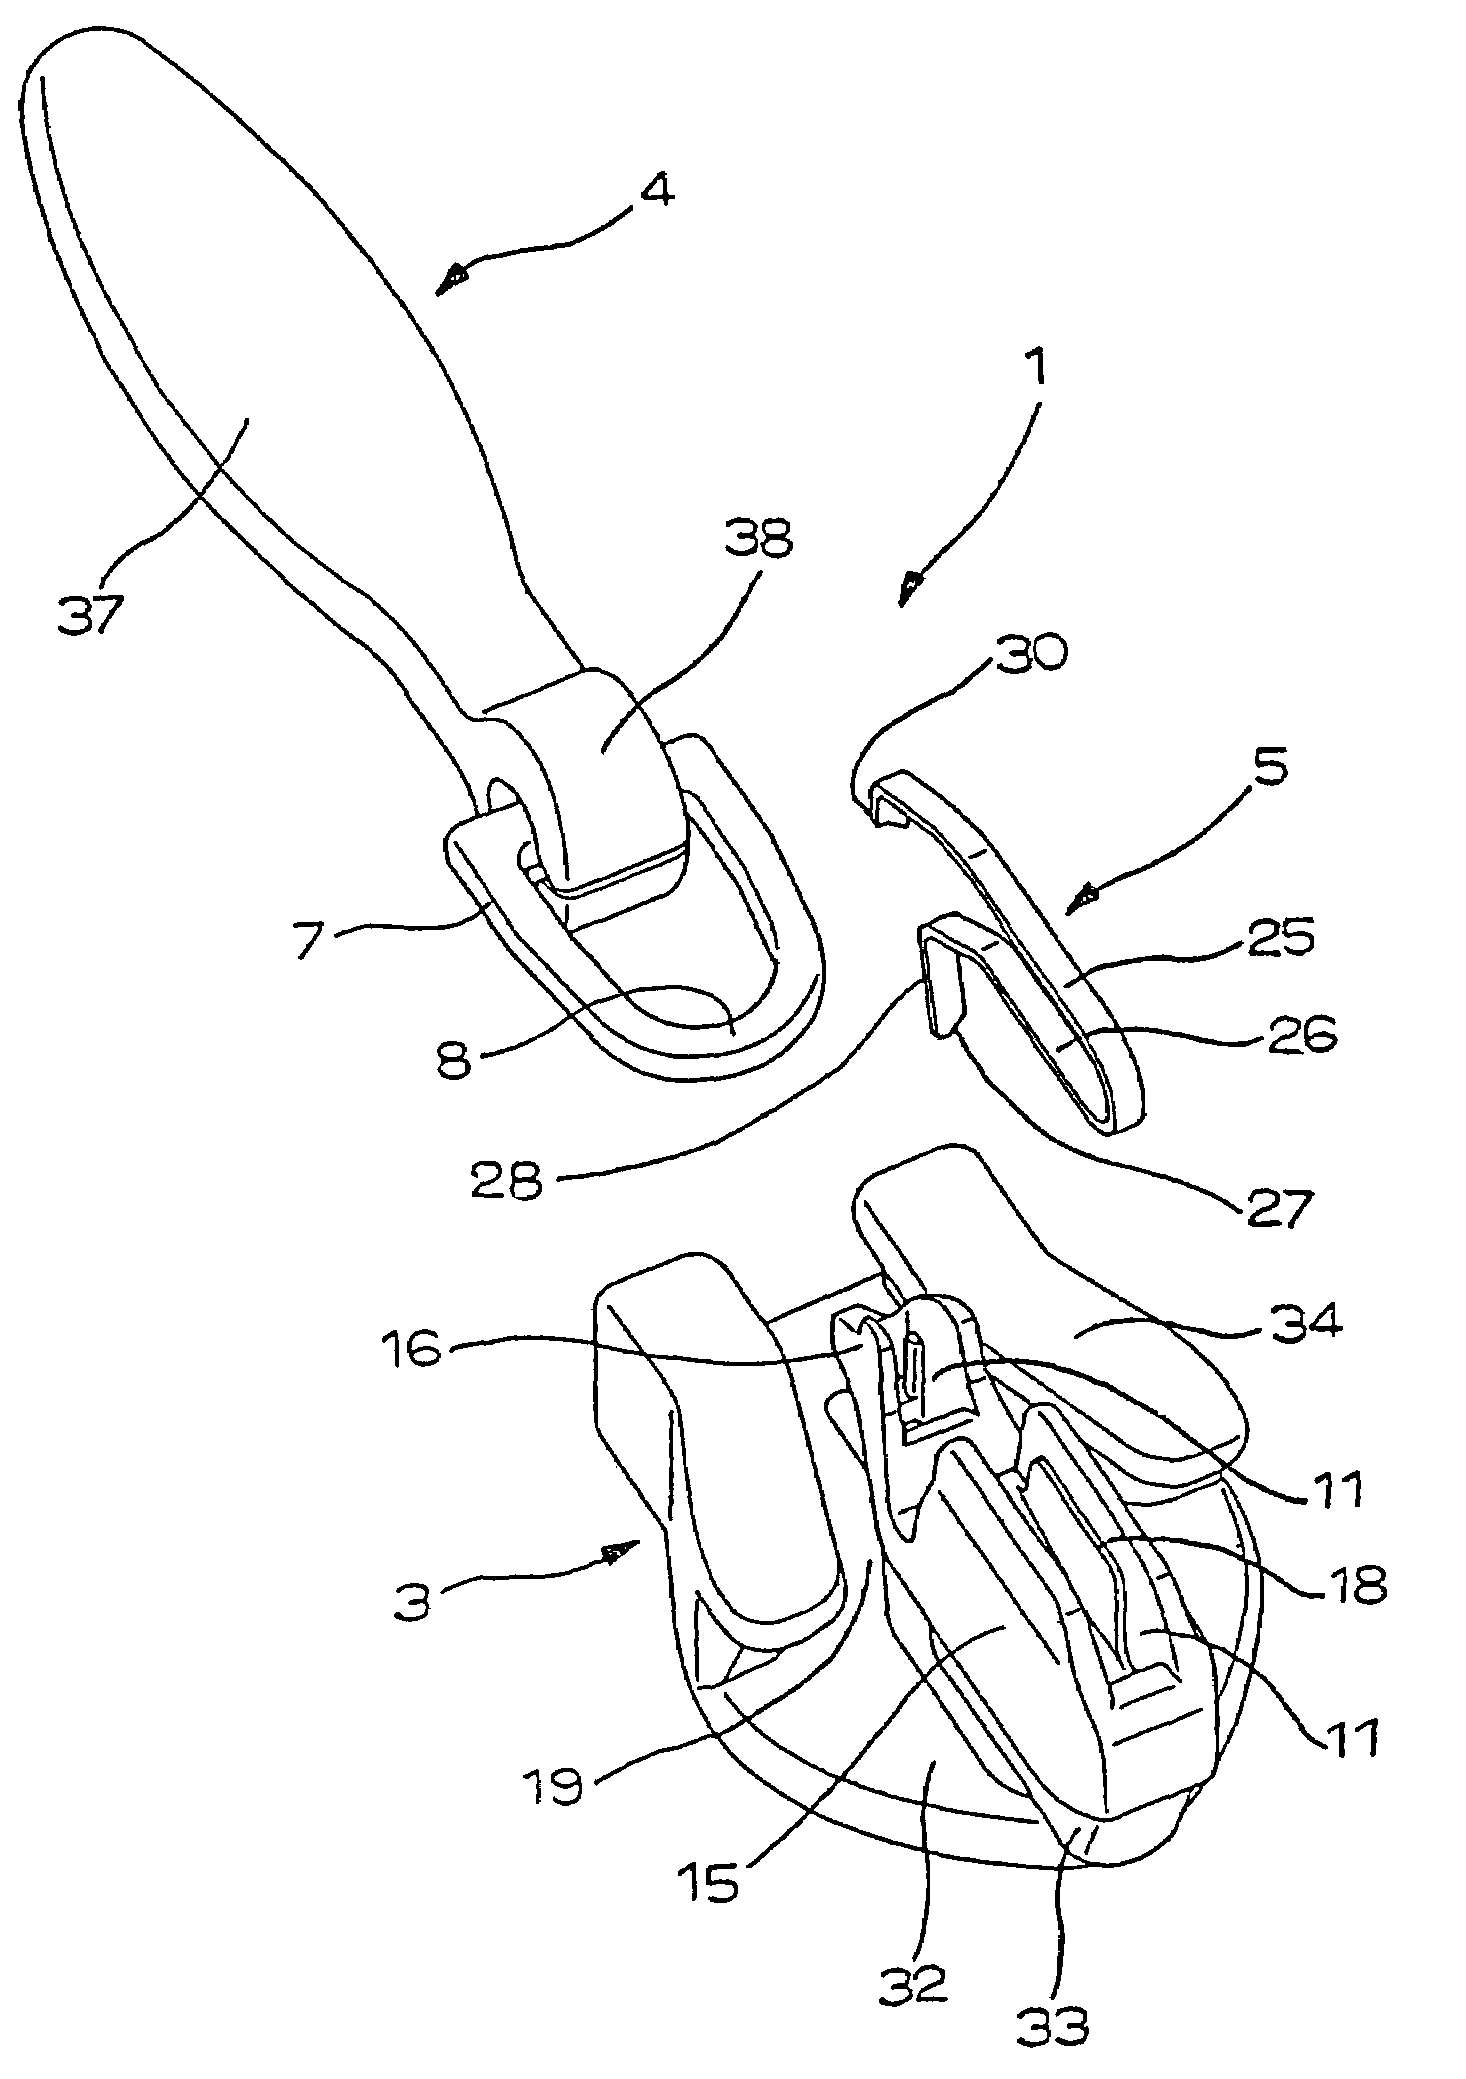 Slider for slide fastener provided with automatic locking device